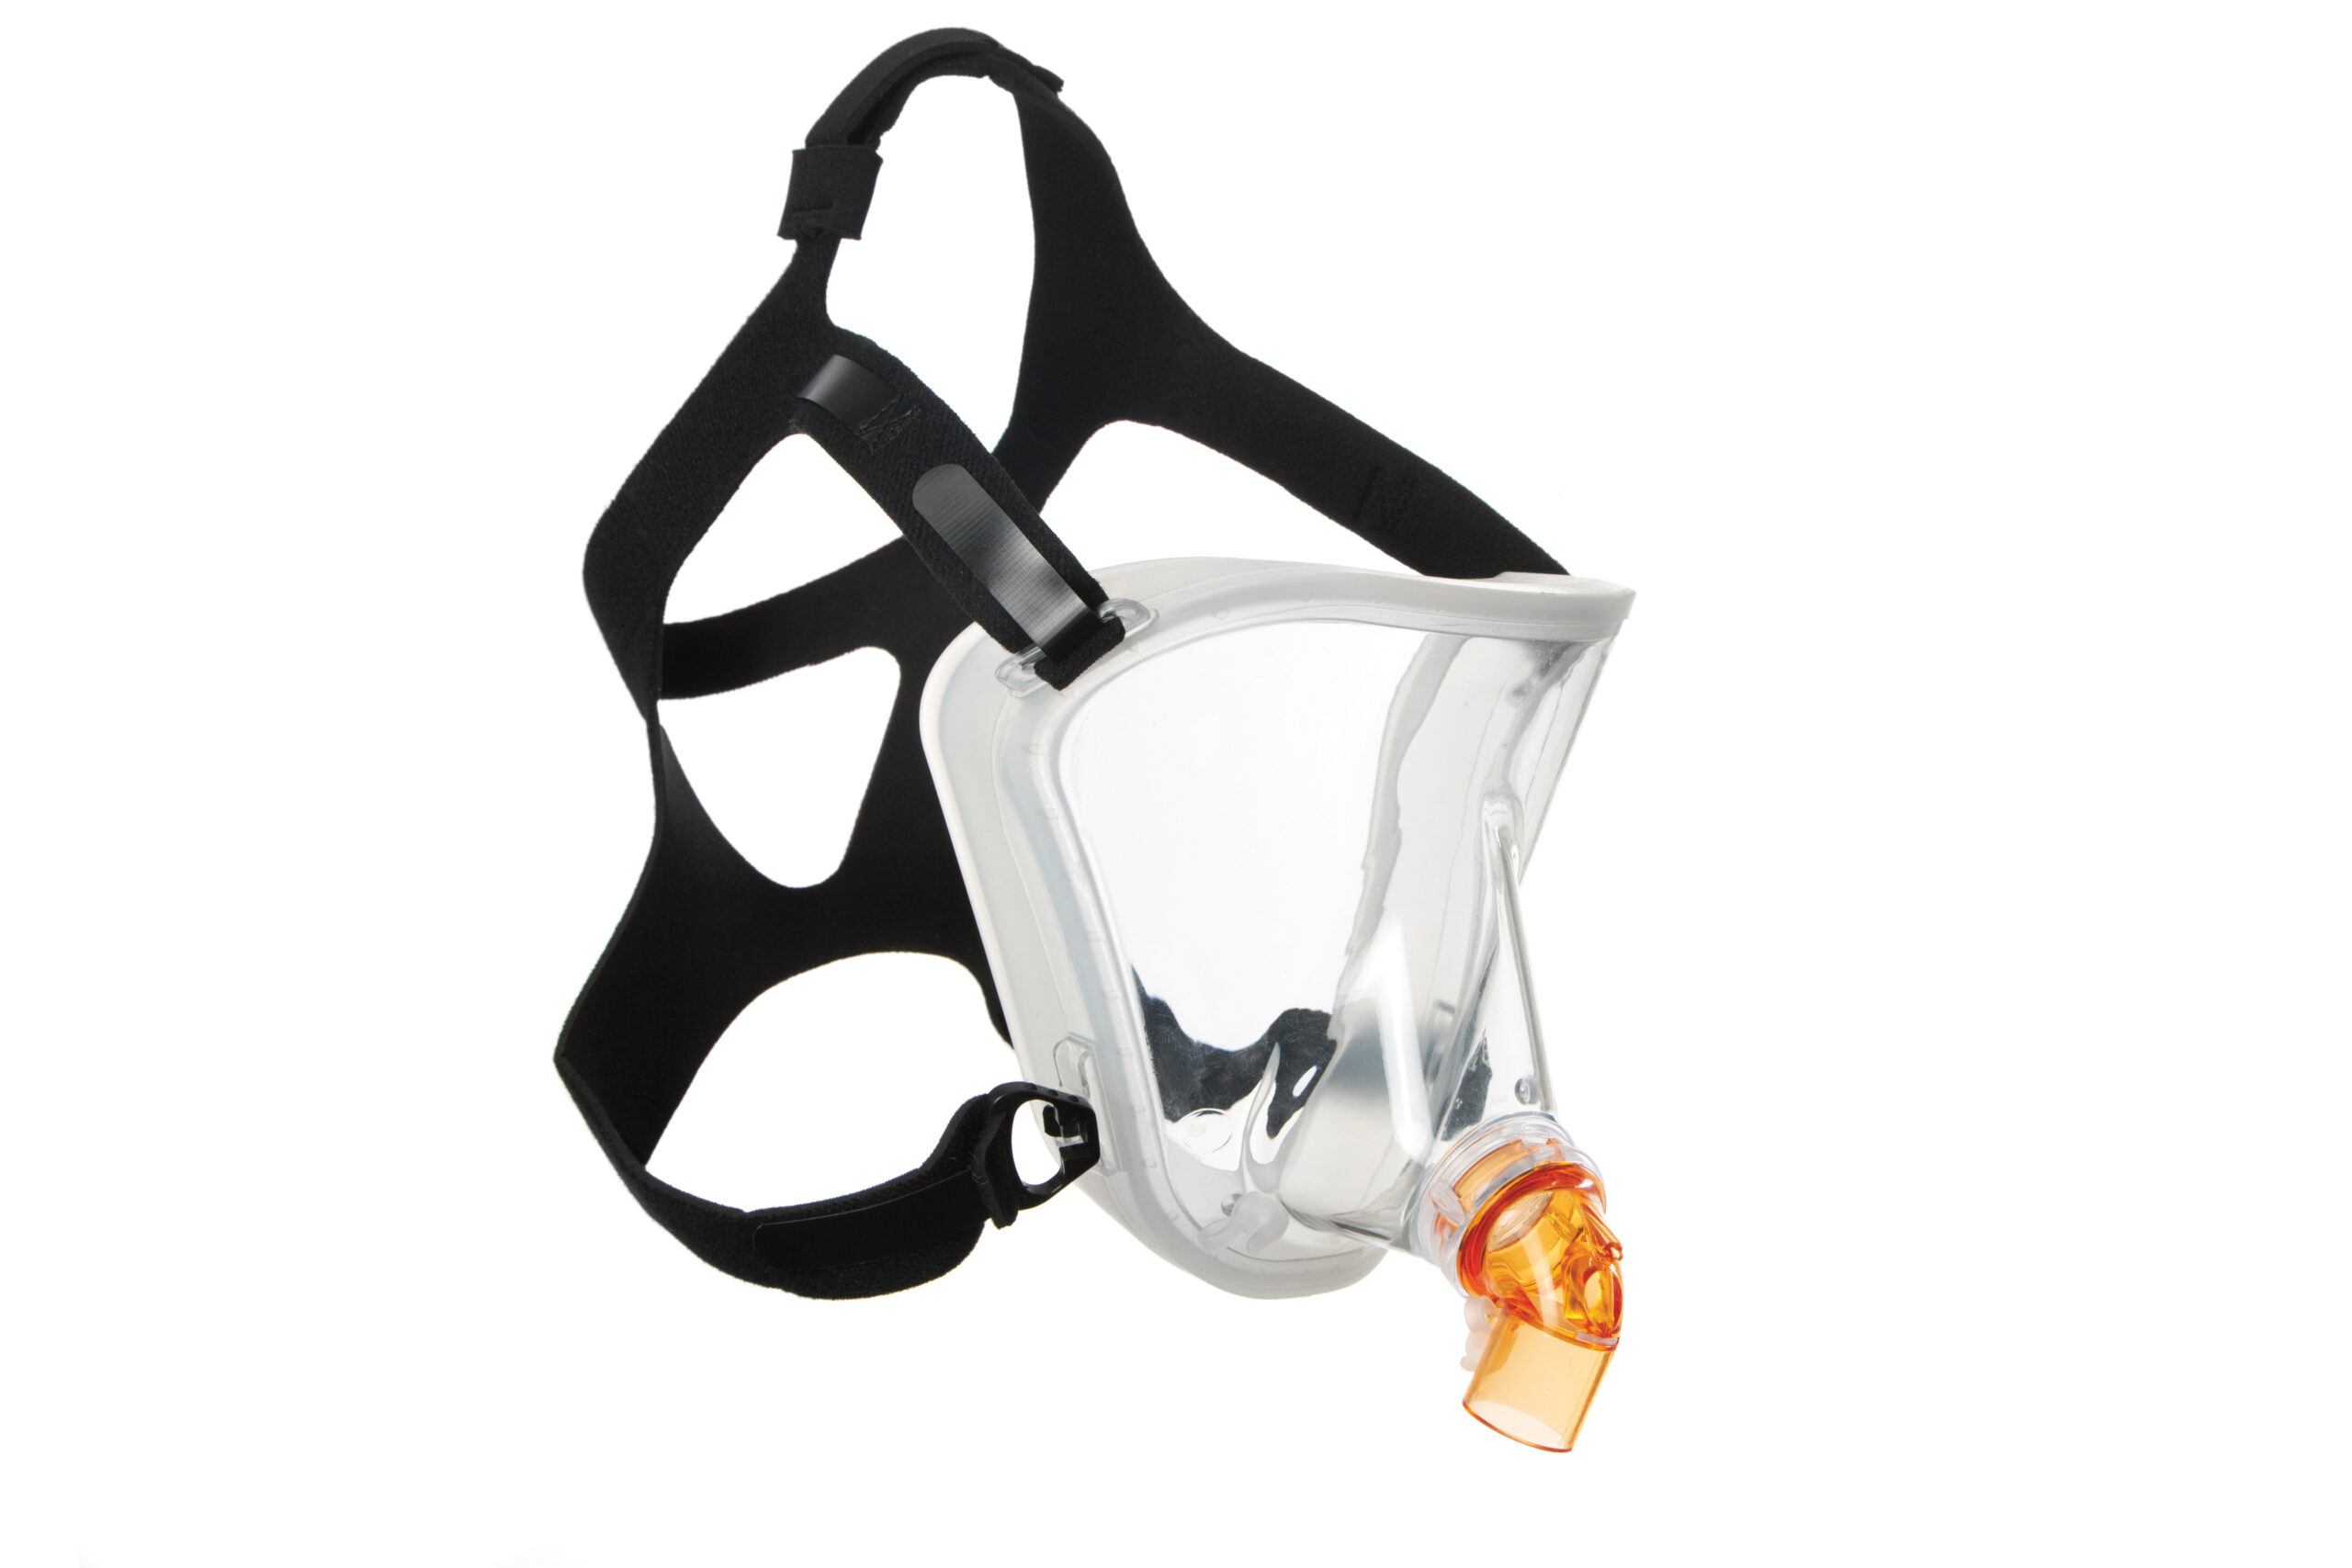 313-9552-BiTrac-MaxShield-Select-total-face-mask-non-vented-elbow-with-anti-asphyxiation-valve-large-adult (1)